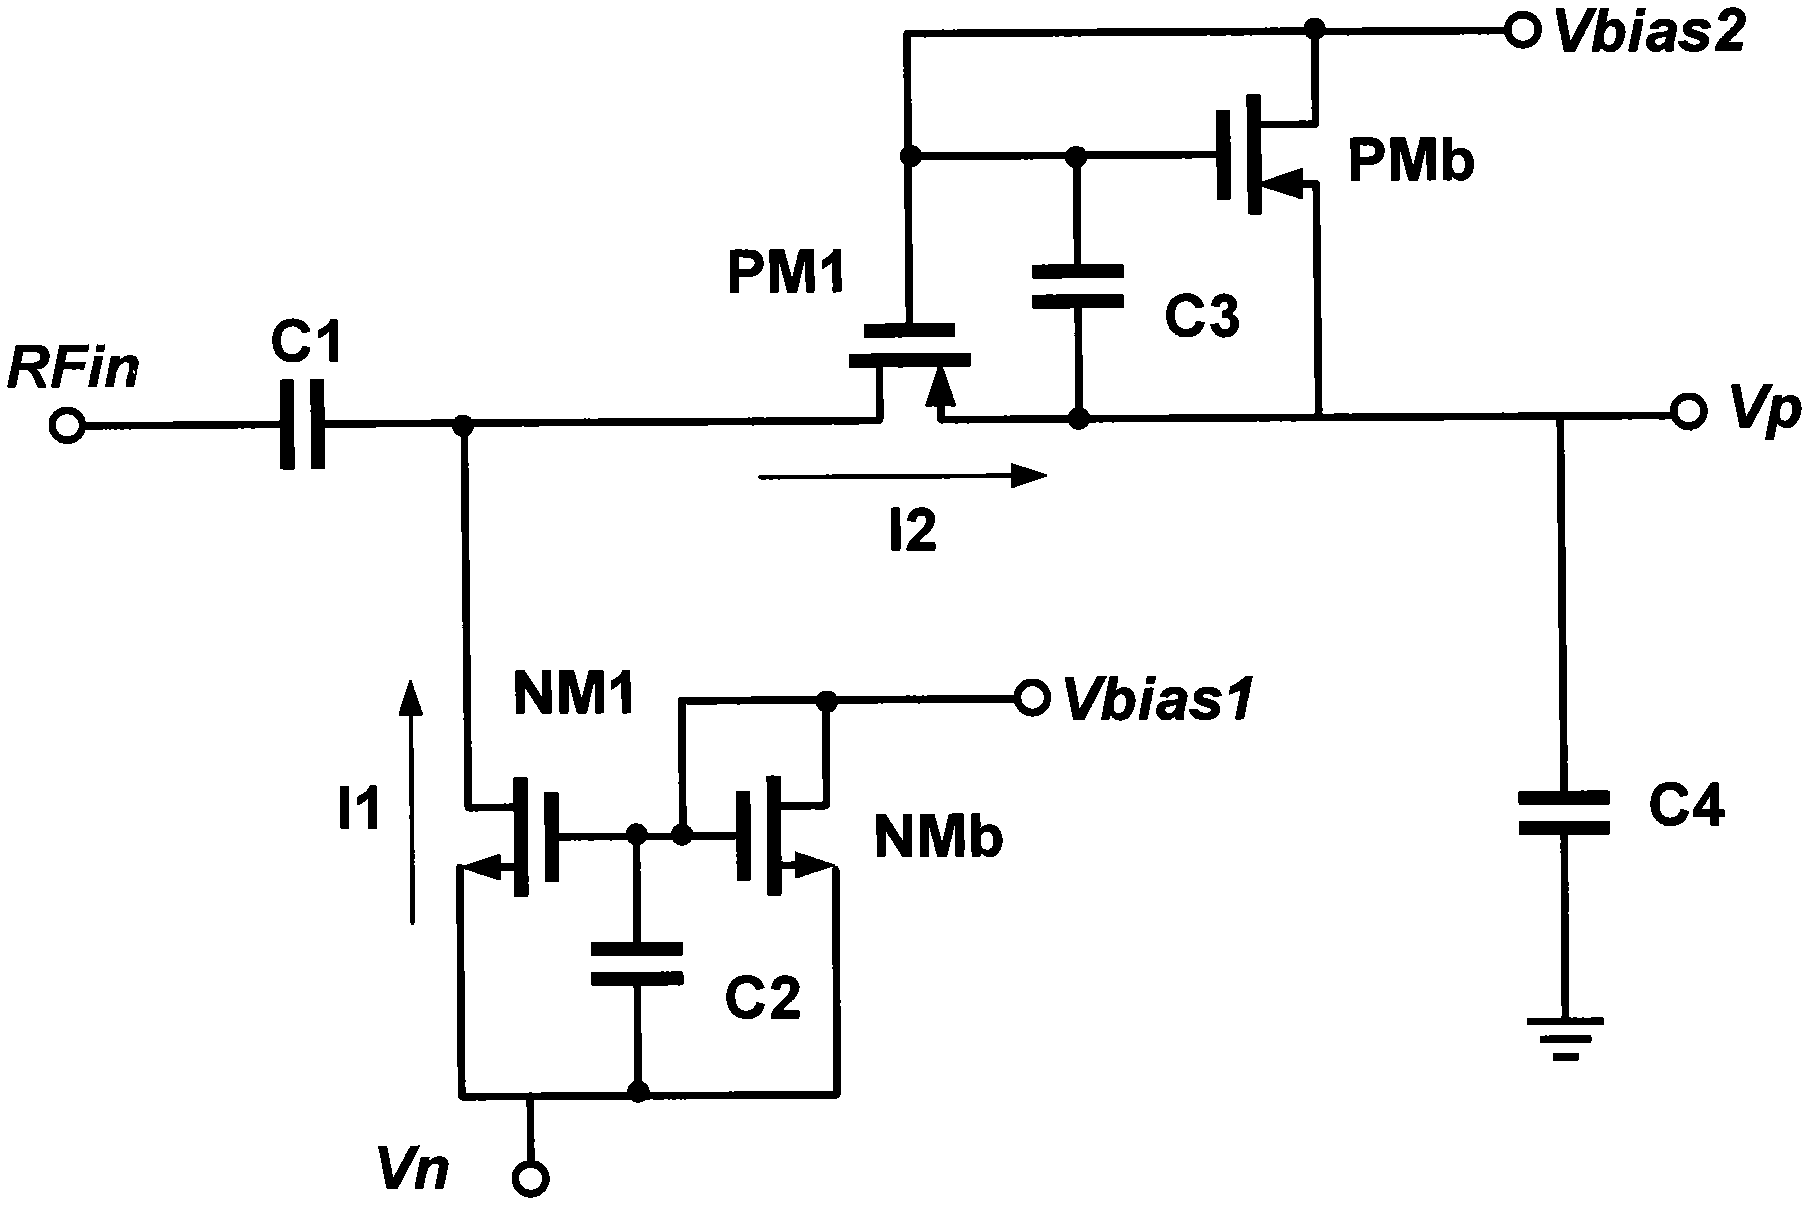 Asymmetrical high speed and low power consumption transceiver